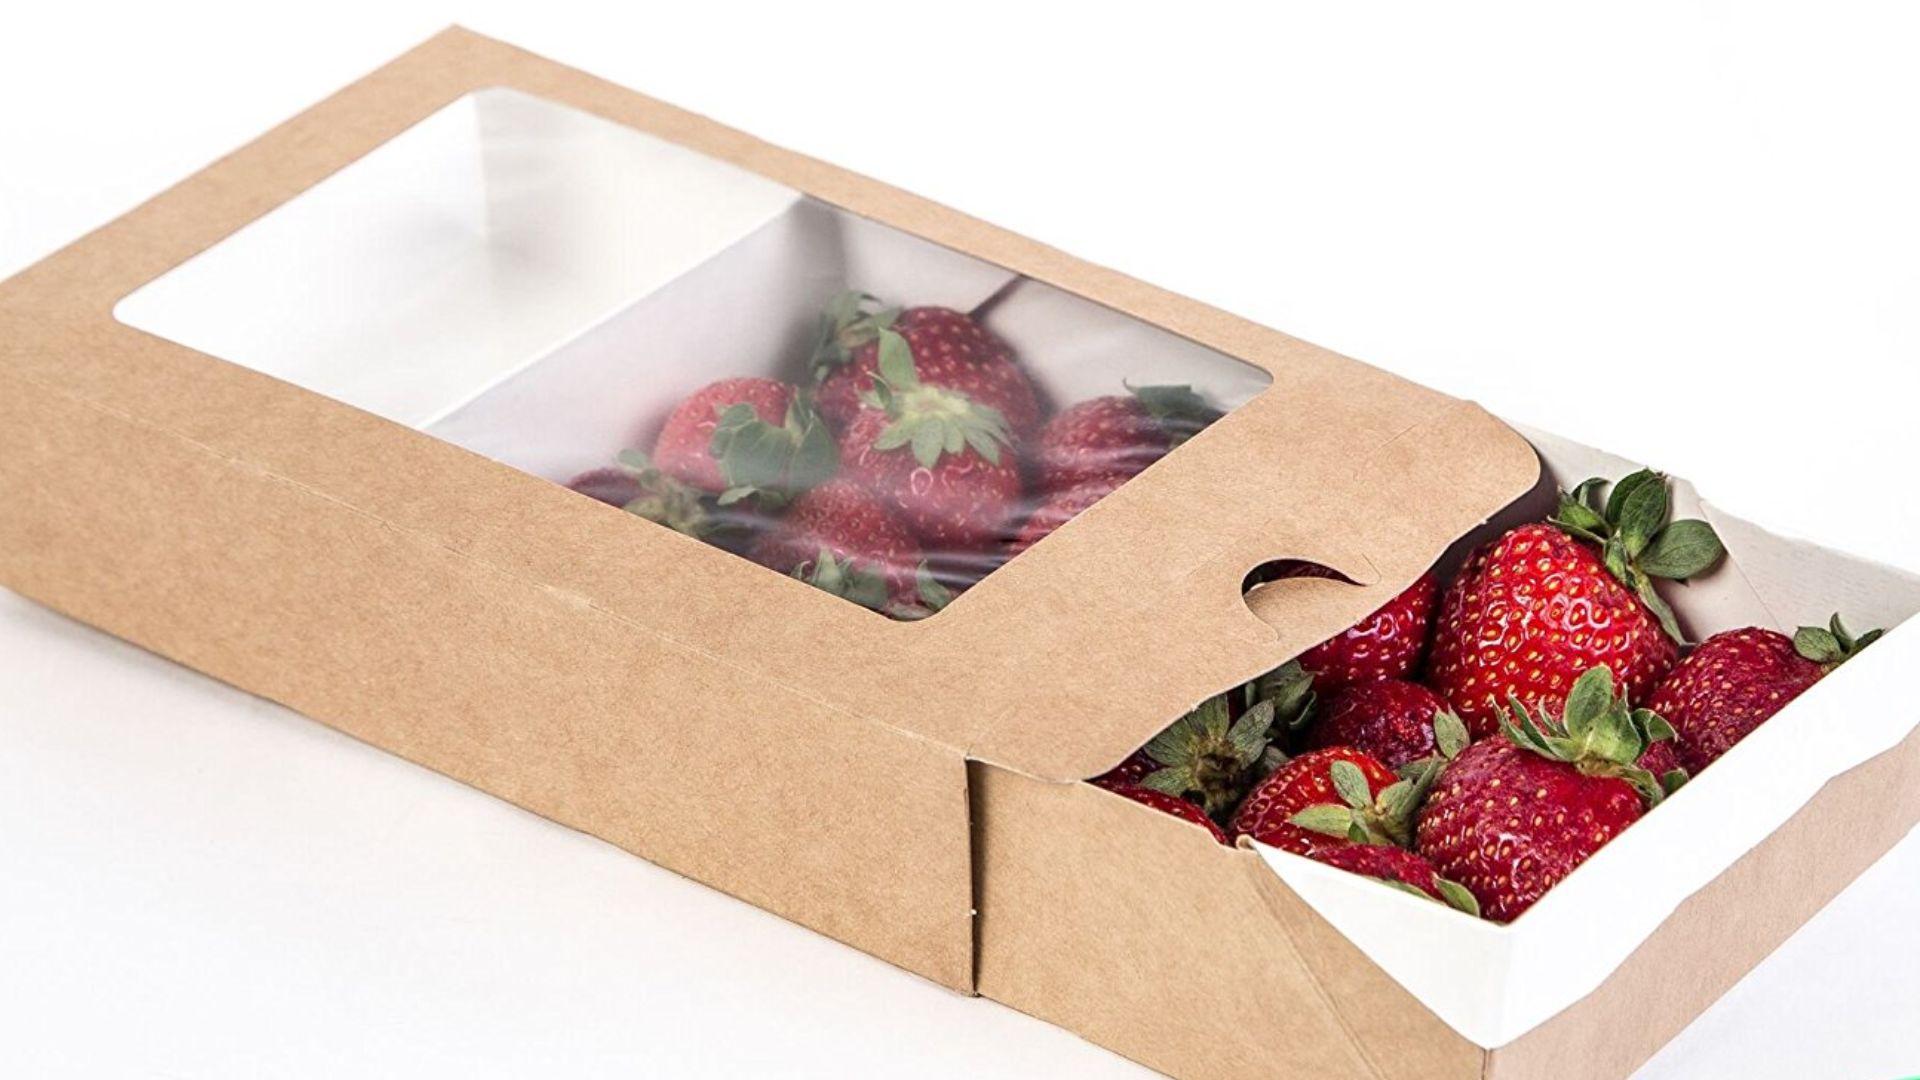 Why Should You Choose Chocolate Strawberry Boxes?